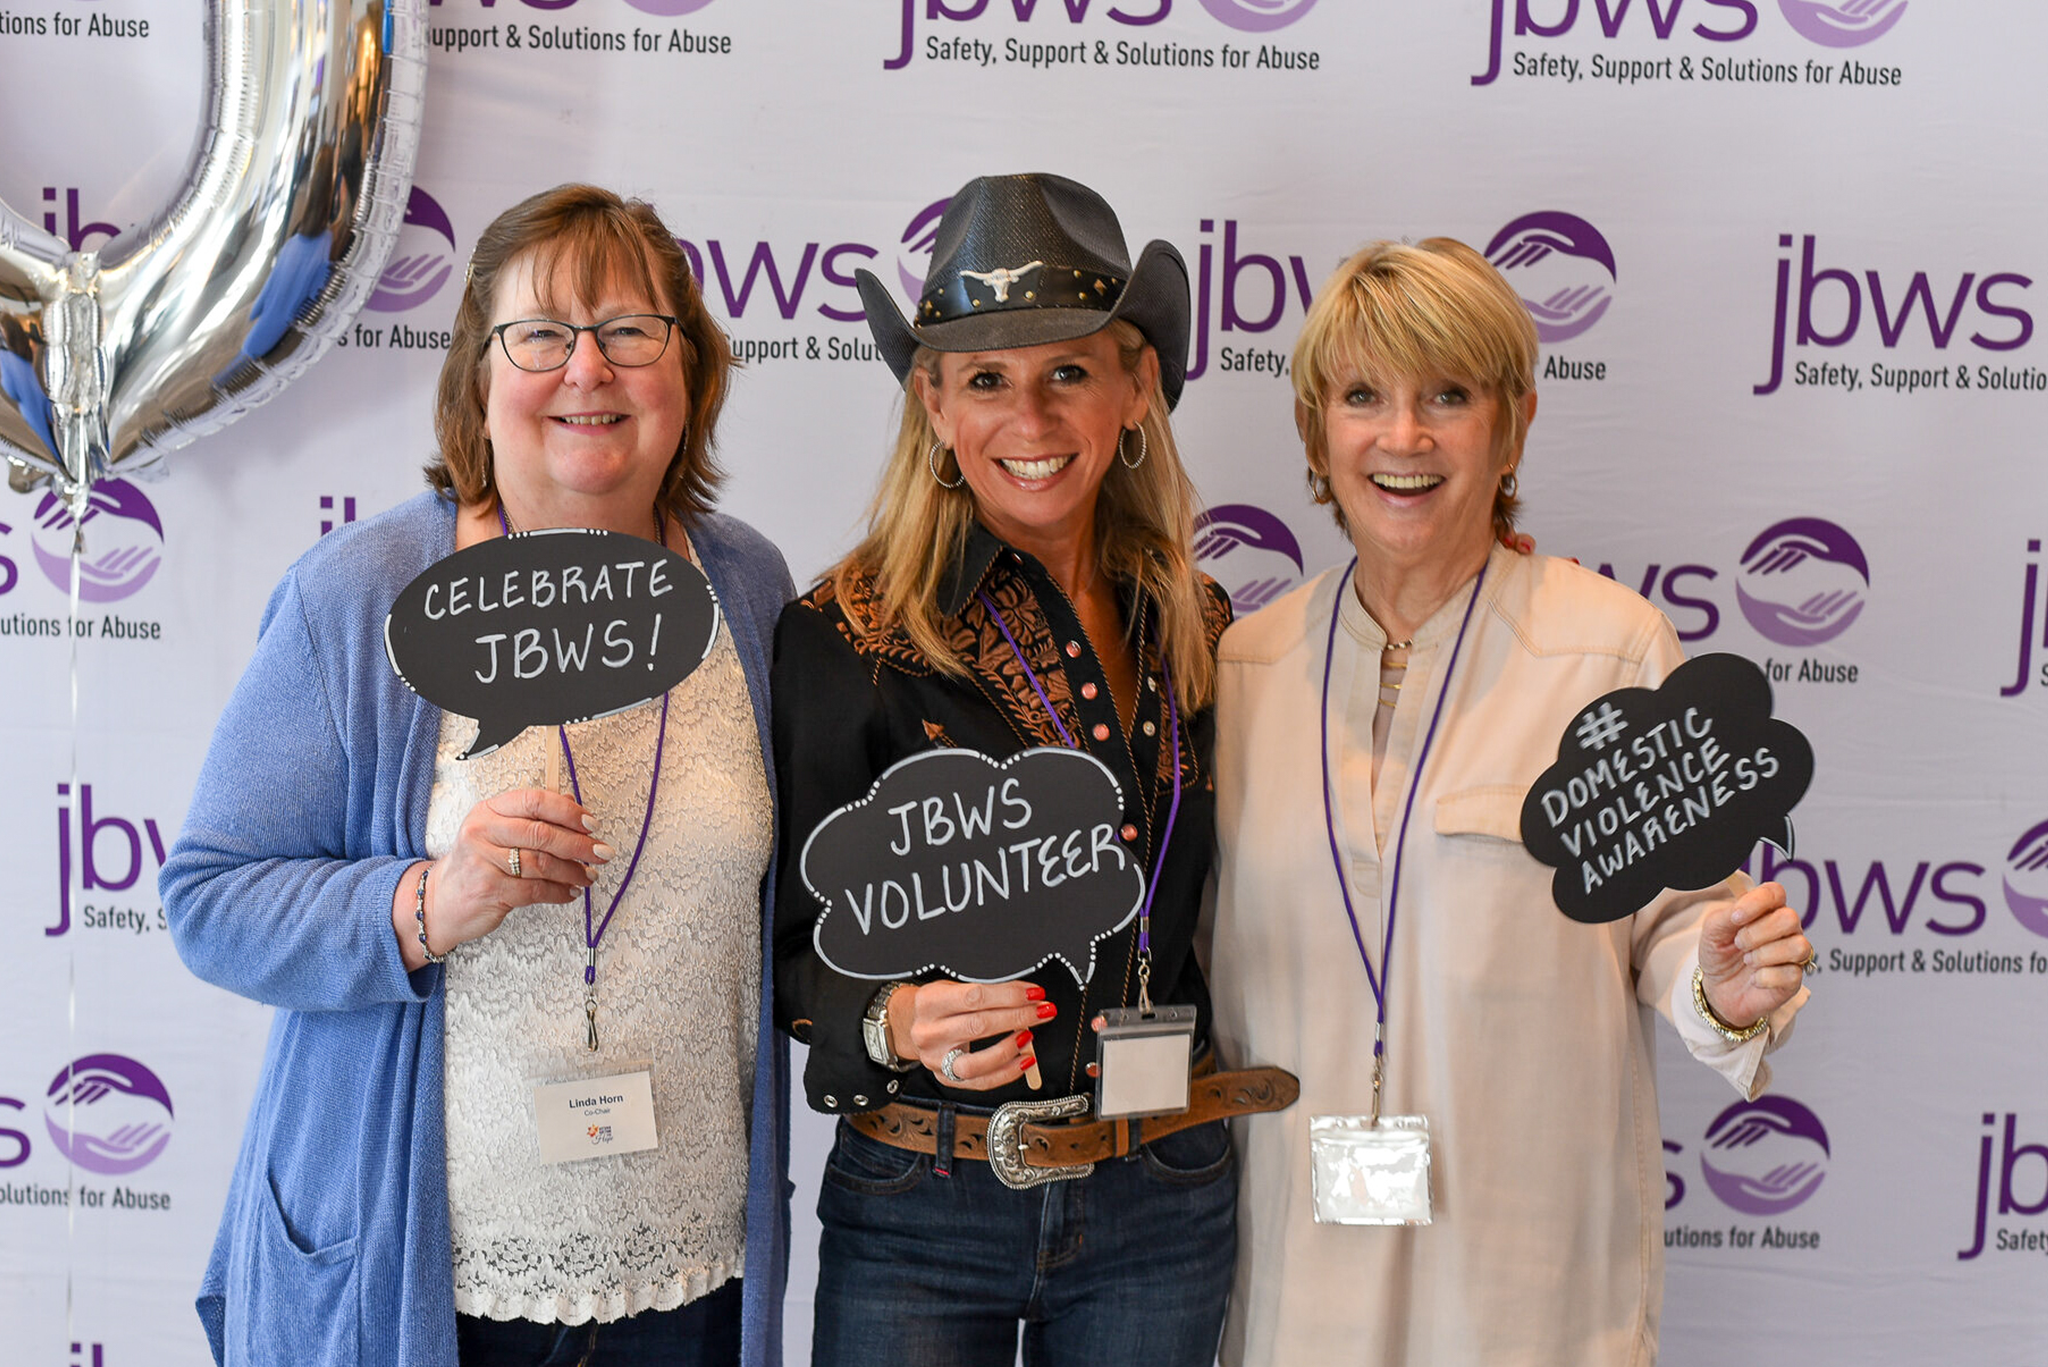 Three women holding signs that say "JBWS volunteer" stand before a step and repeat